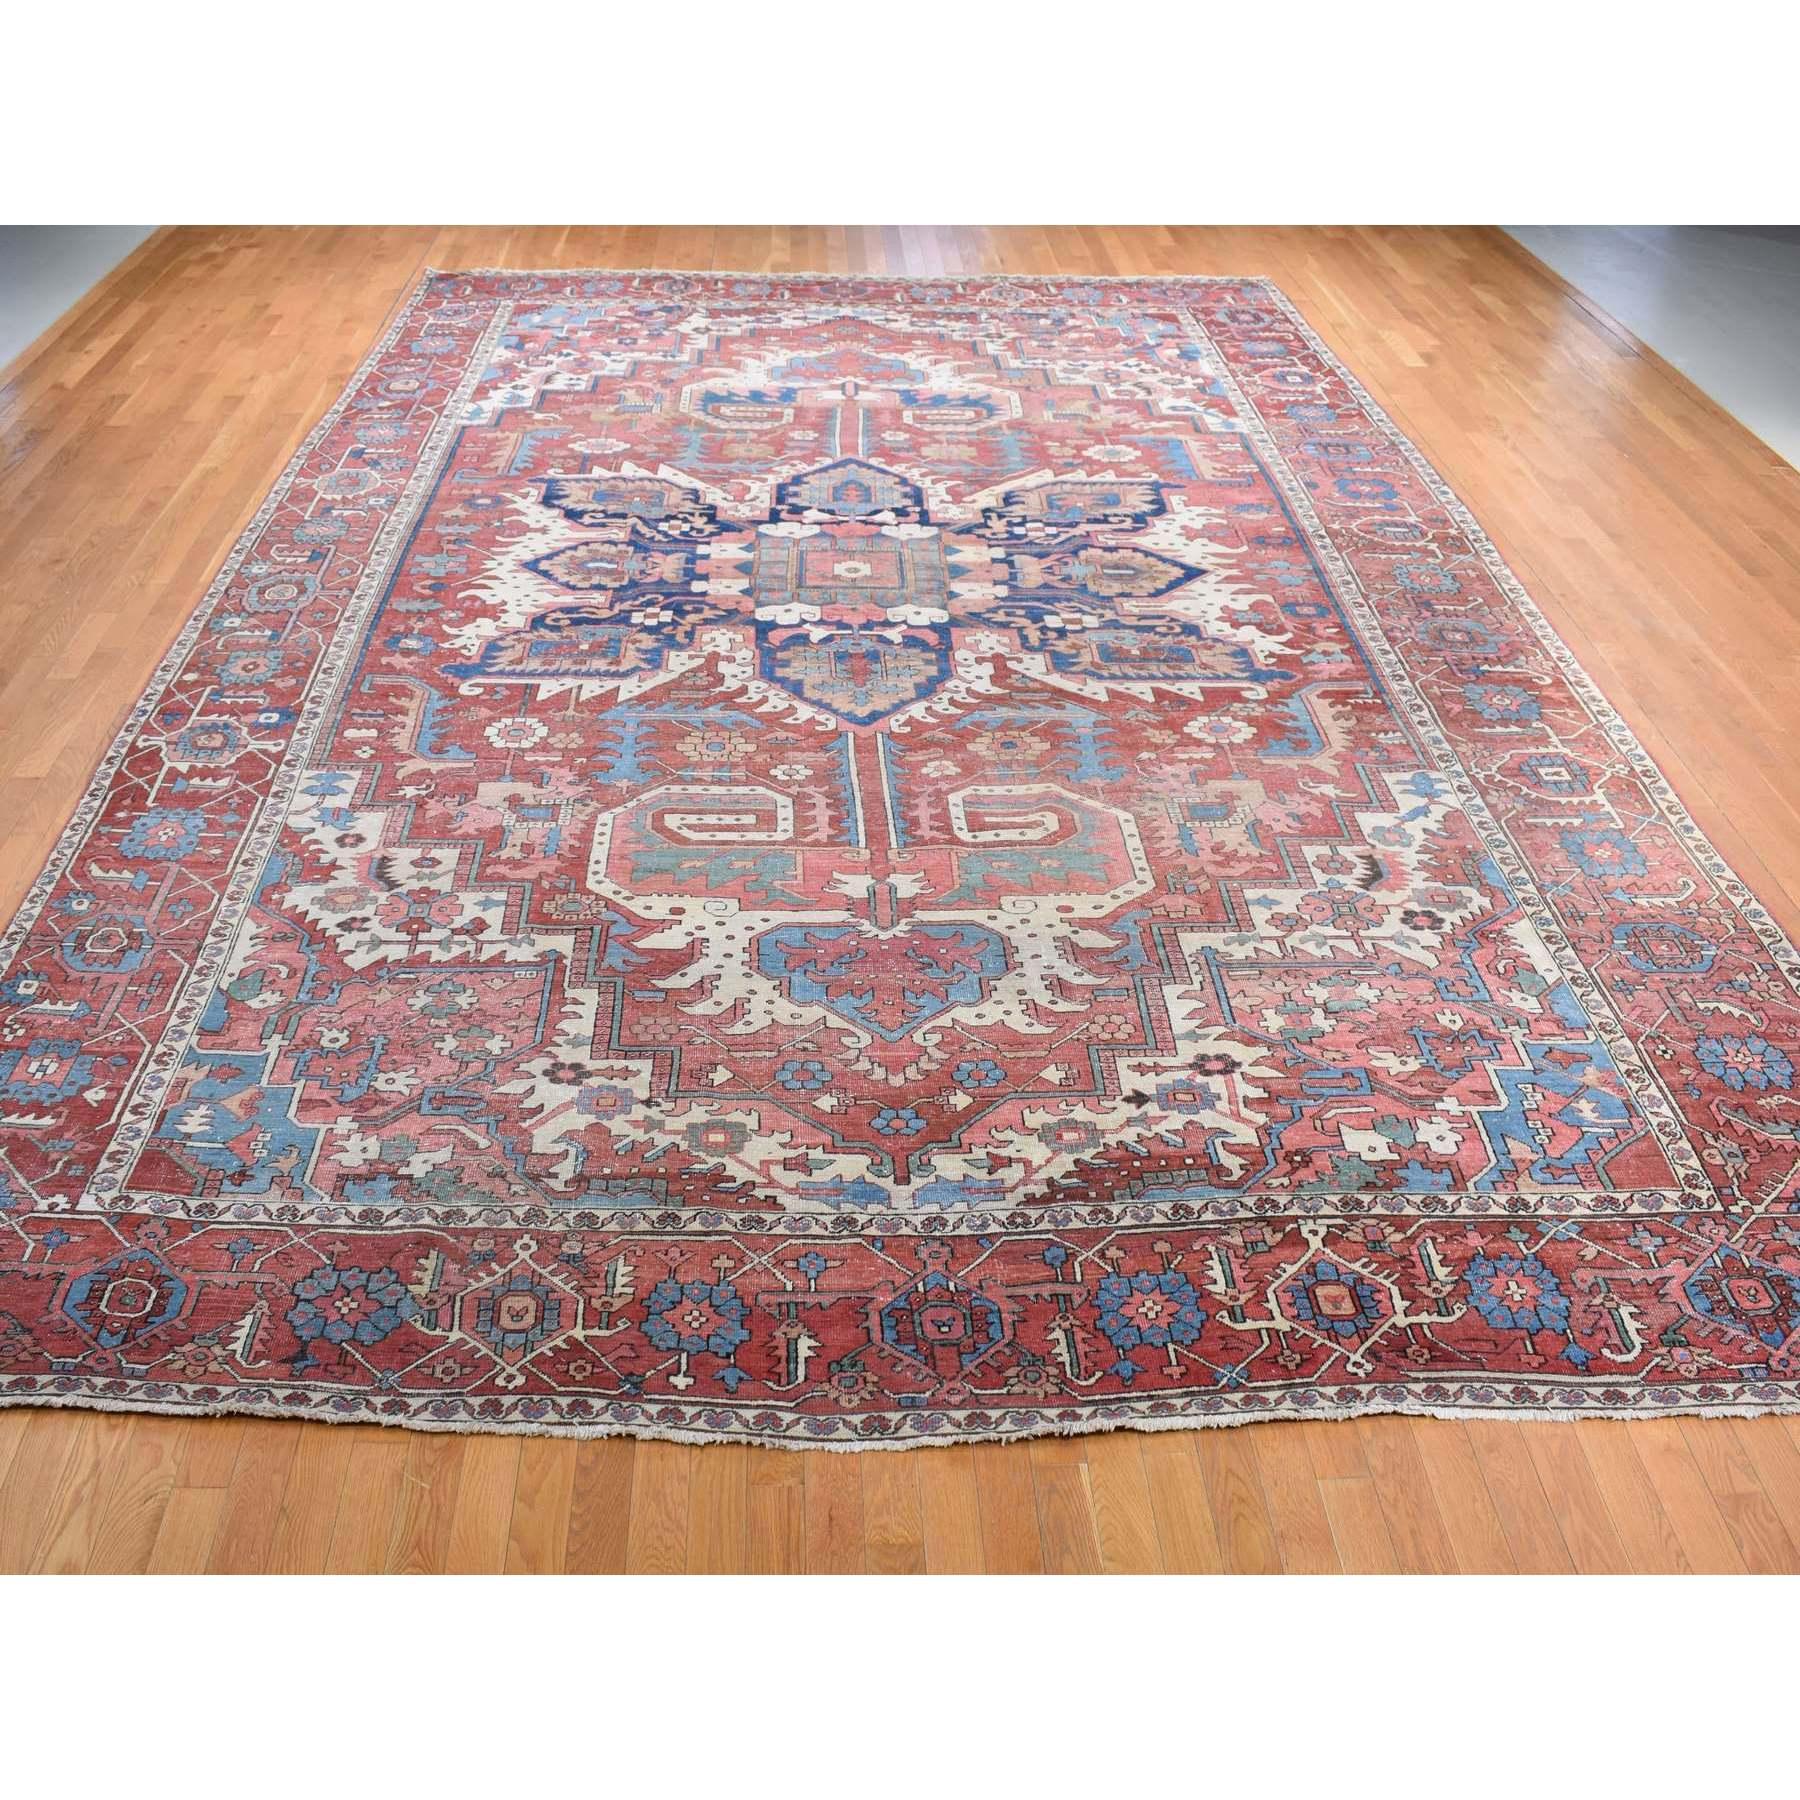 This fabulous hand-knotted carpet has been created and designed for extra strength and durability. This rug has been handcrafted for weeks in the traditional method that is used to make.
exact rug size in feet and inches : 12'3